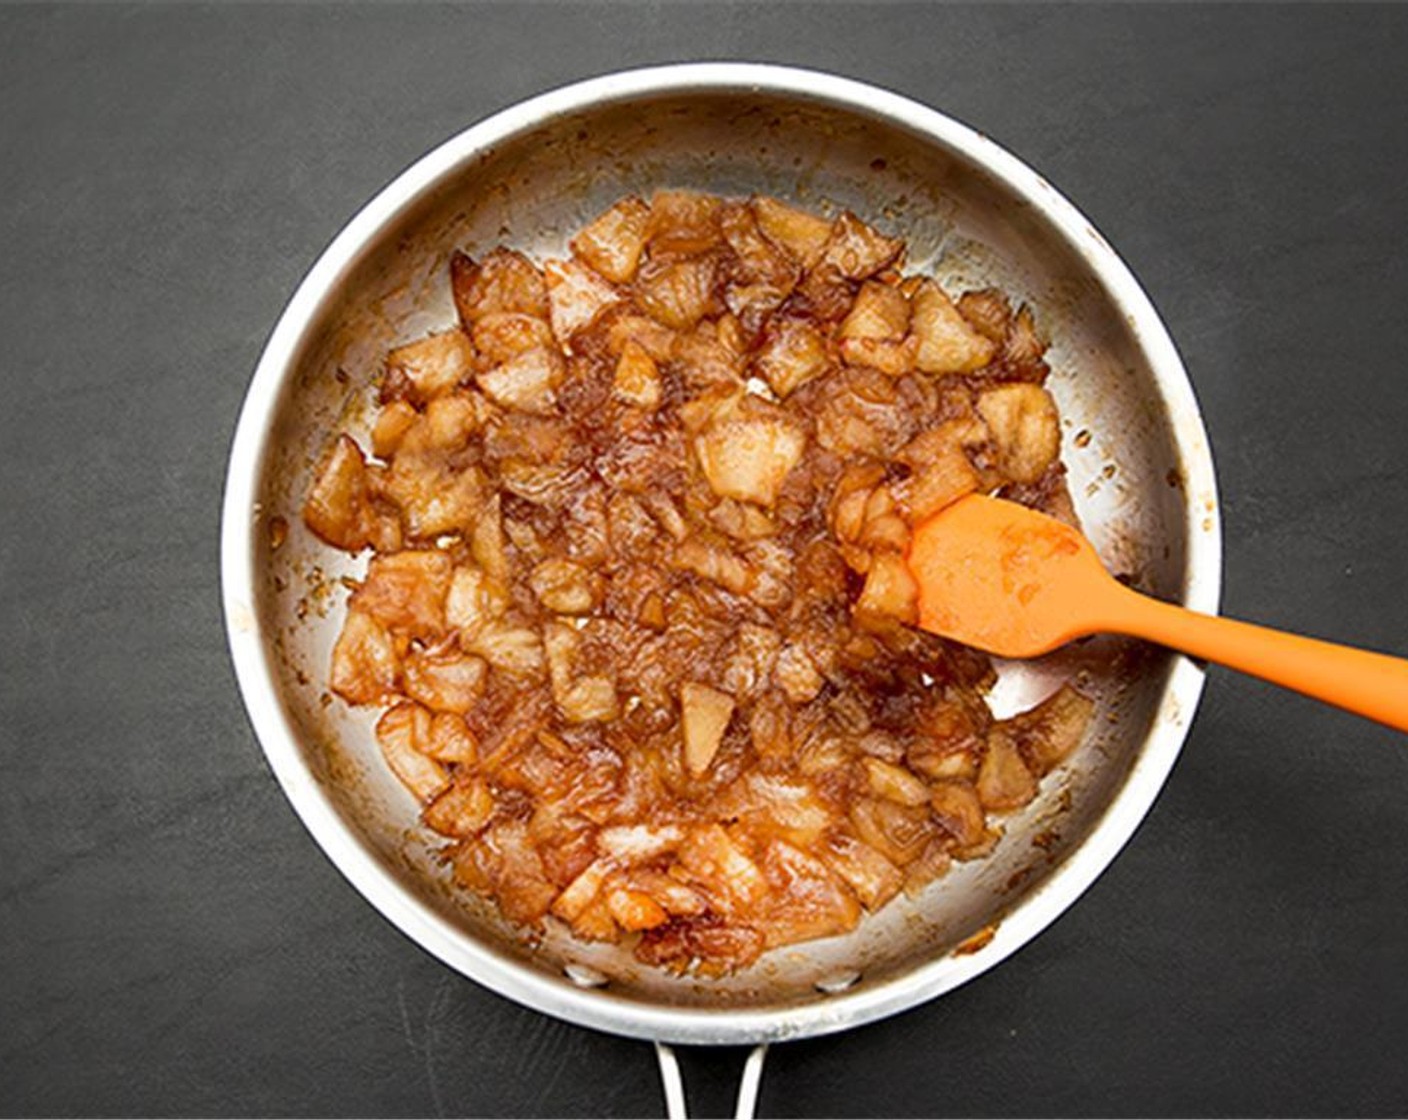 step 5 Combine Apples, Dark Brown Sugar (1/2 cup), Ground Cinnamon (1 tsp), Salt (2 pinches), and 1 1/2 tsp juice from Lemon (1) into a frying pan and cook. Stir until the apples begin to cook and the sugar has dissolved.